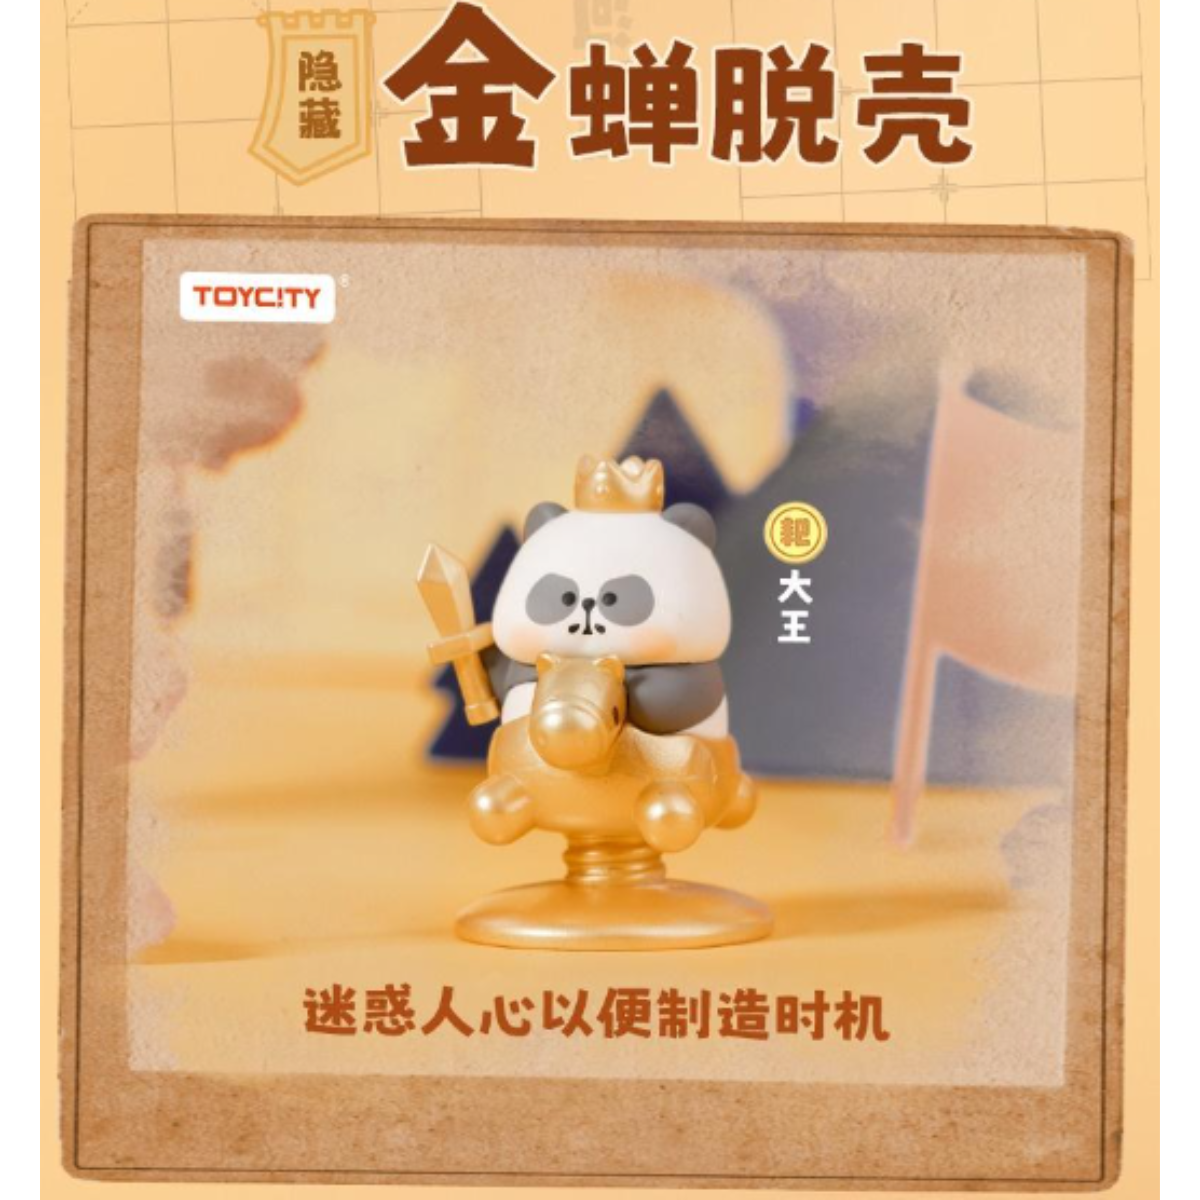 Toy City x Mr. Pa Small Pa Chinese Chess Series-Single Box (Random)-ToyC!ty-Ace Cards &amp; Collectibles